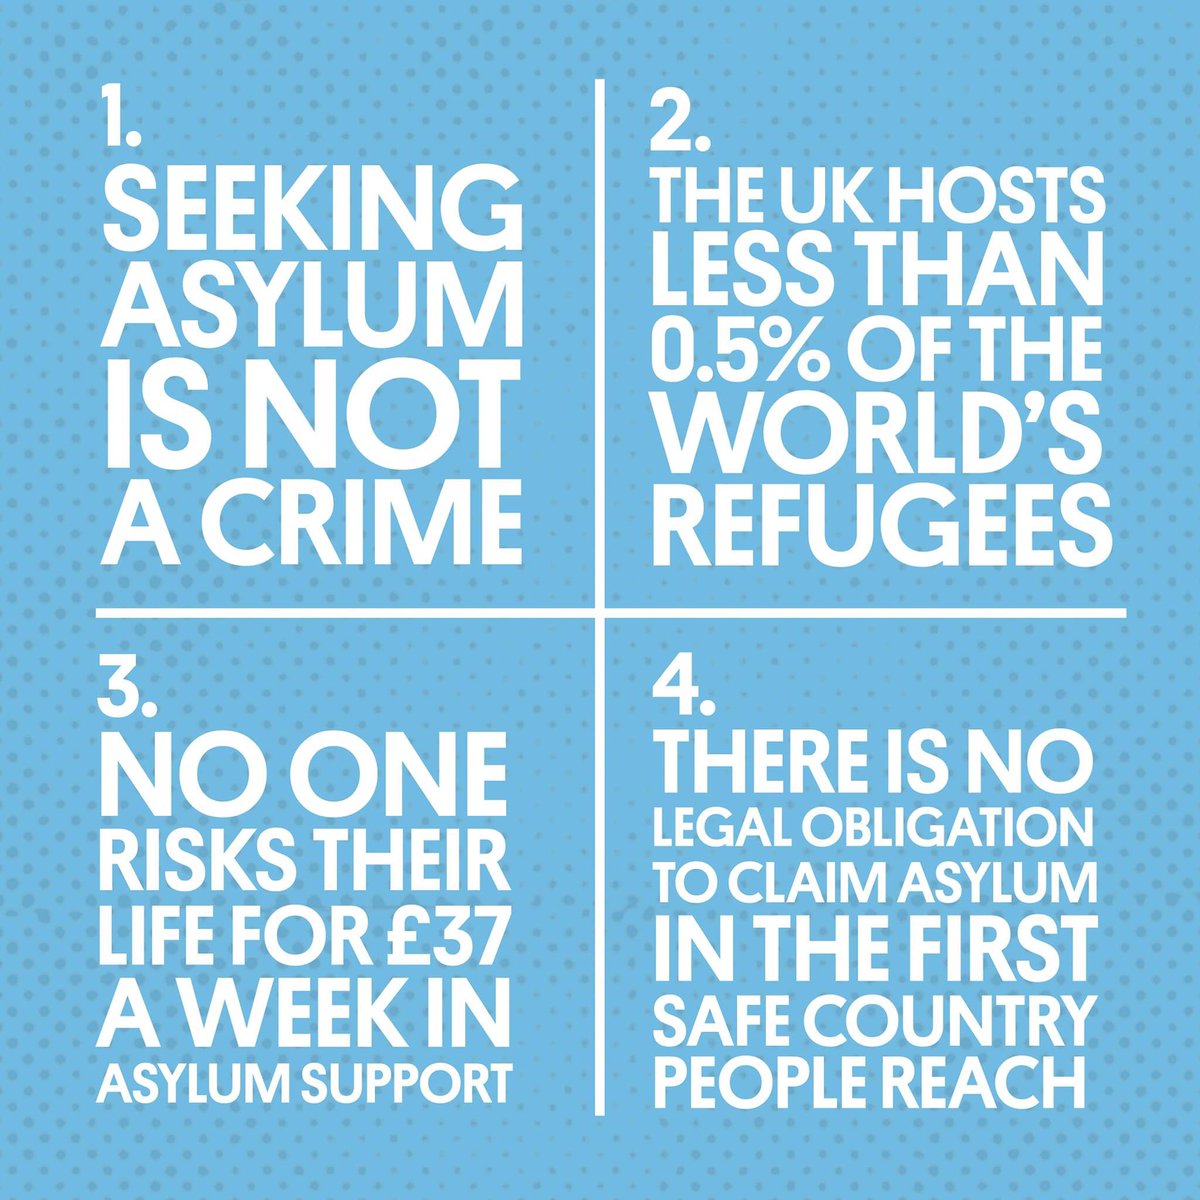 Remember this ⬇️
#refugeeswelcome
#SafePassage
#opentheborders